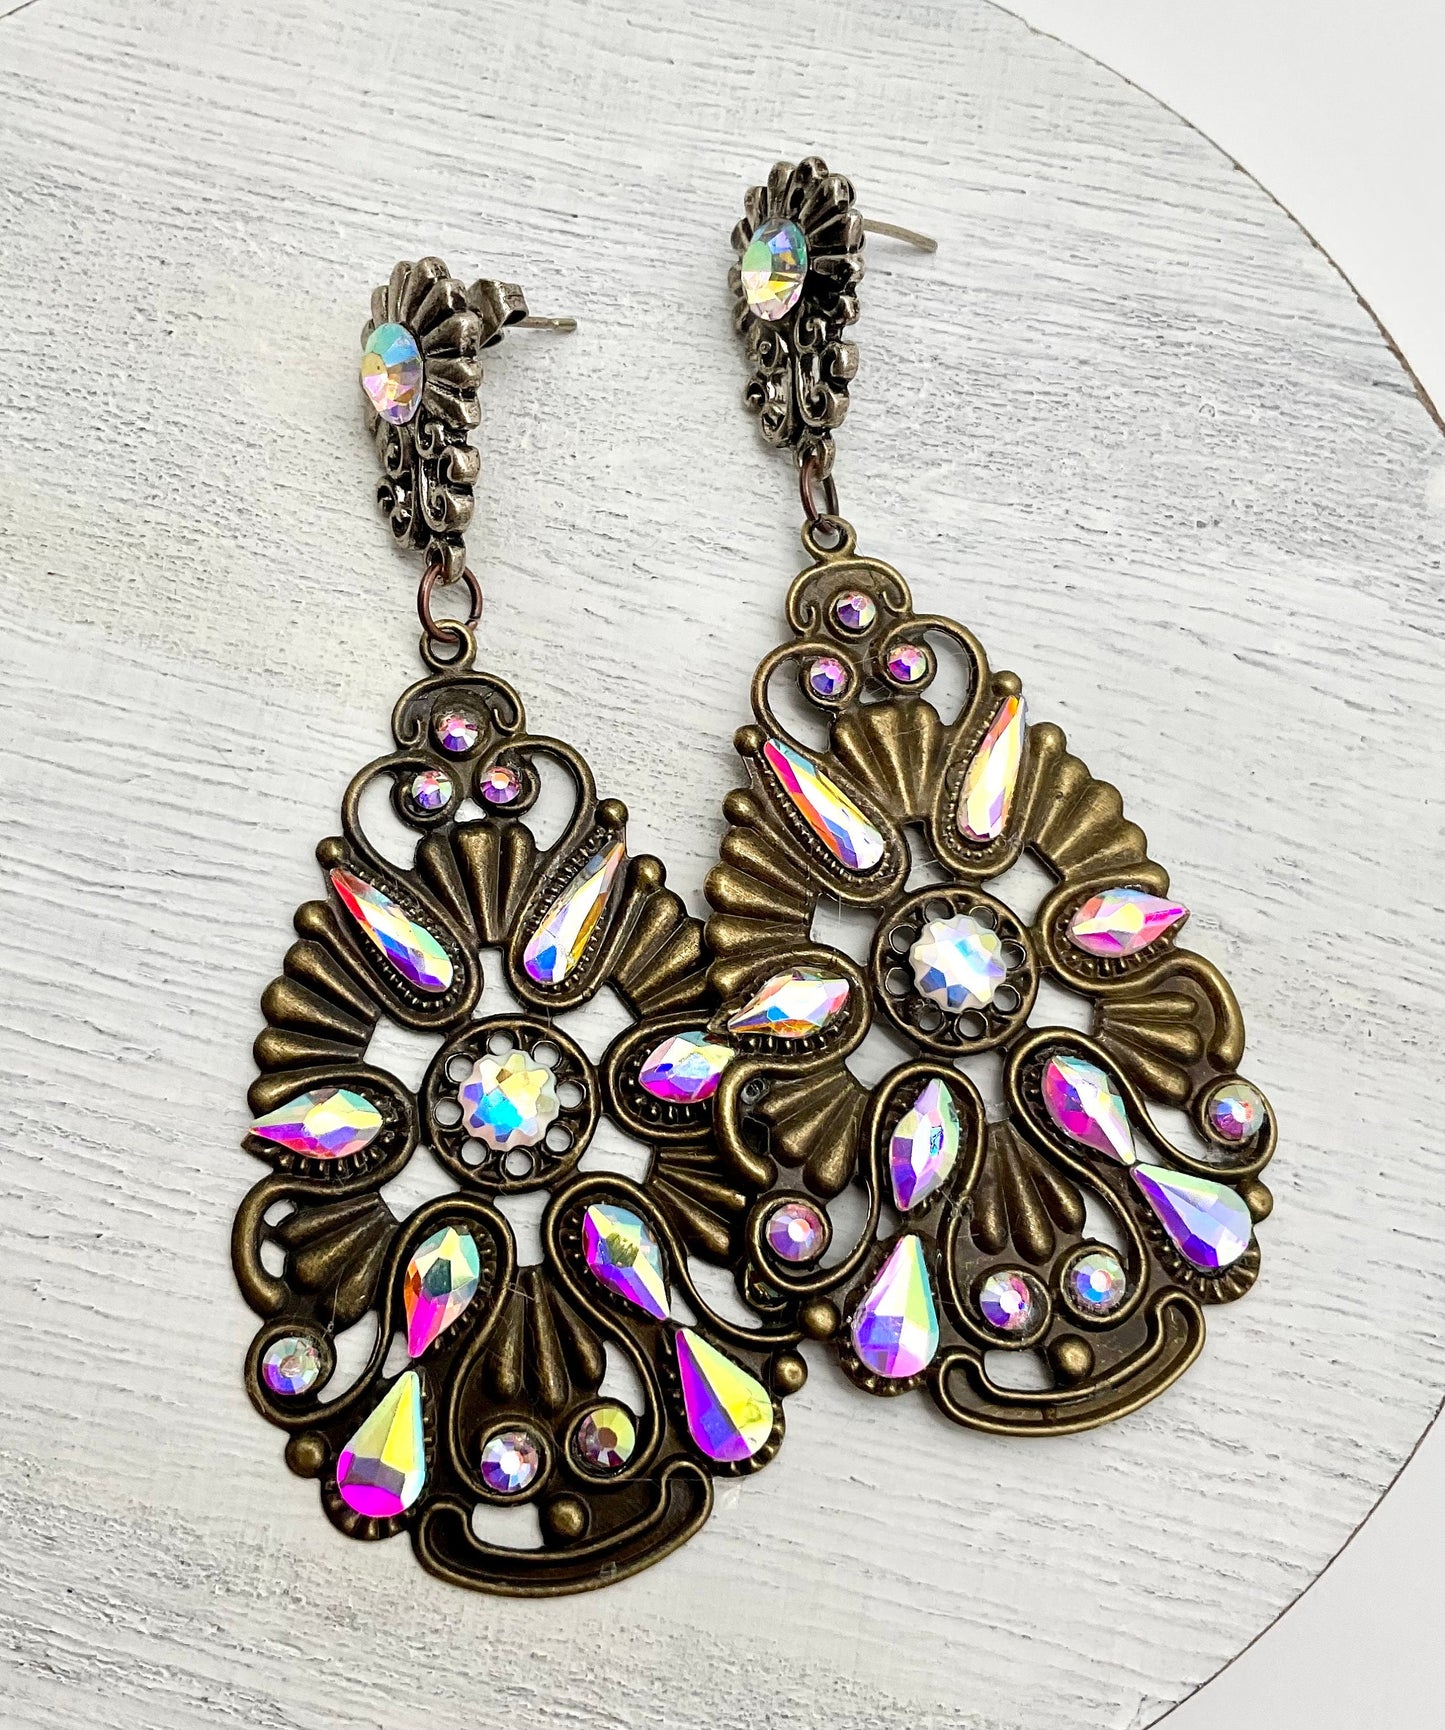 Brass Floral Tear Drop Shaped Dangle Earrings with AB Crystal Accents